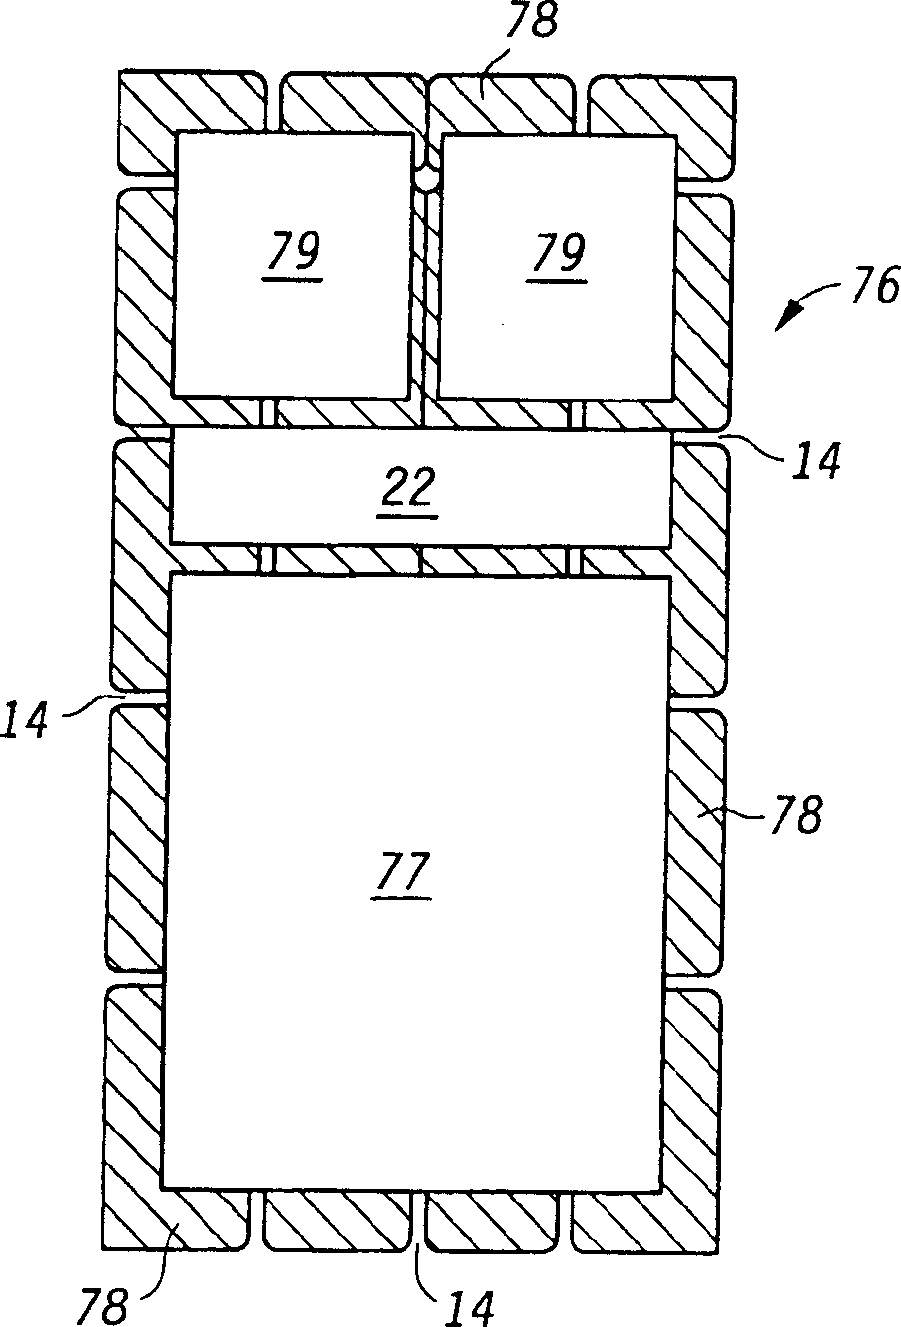 Integrated circuit structure for mixed-signal RF applications and circuits